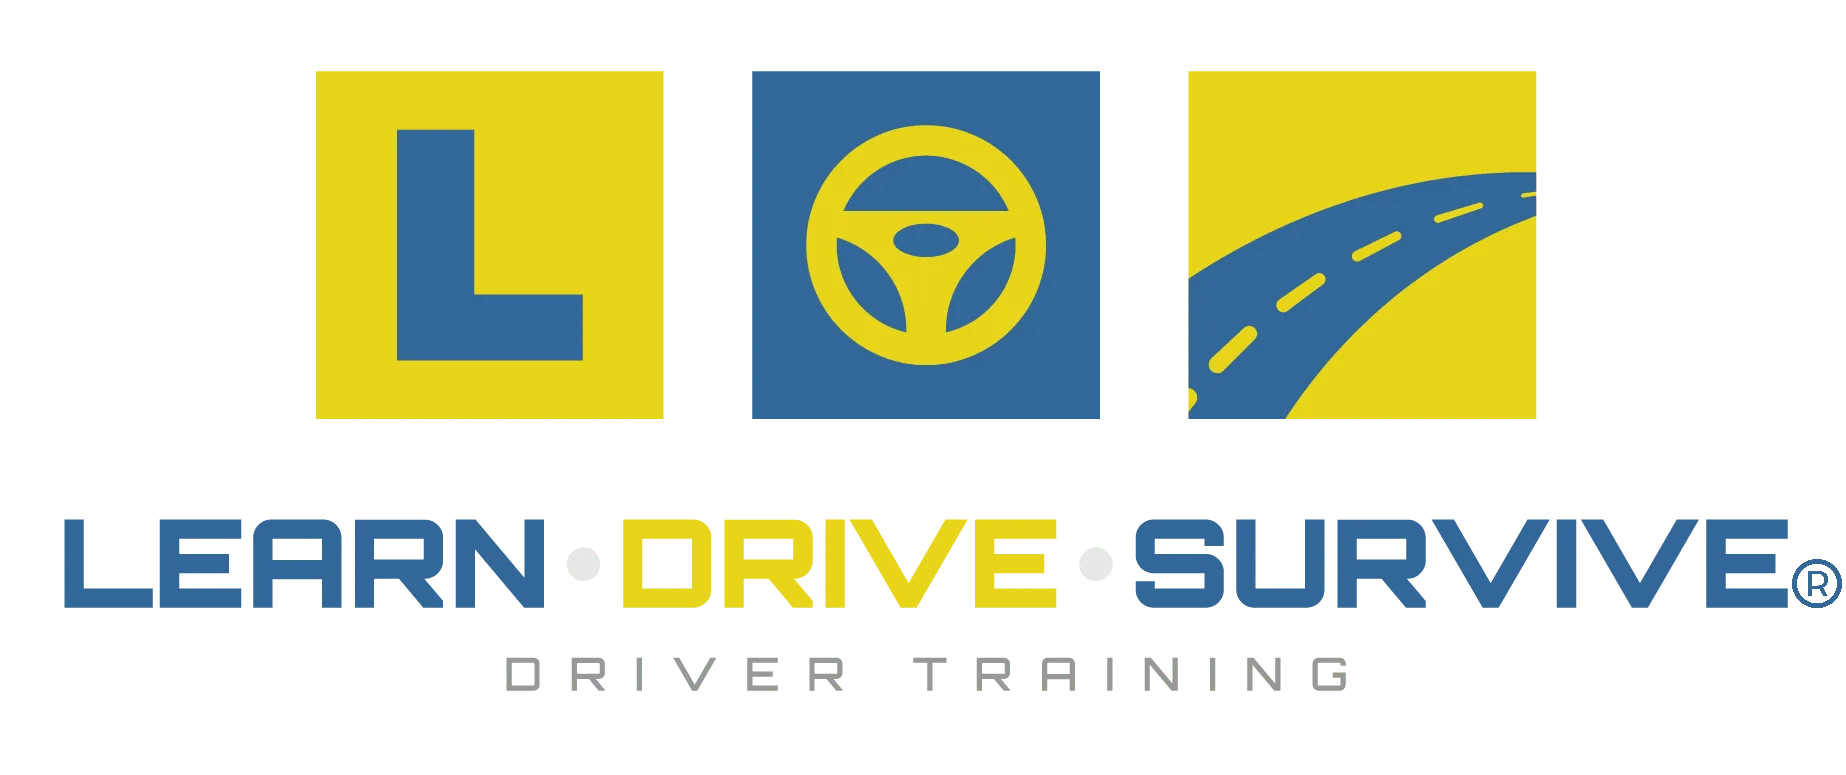 Safer Drivers Course Learn Drive Survive